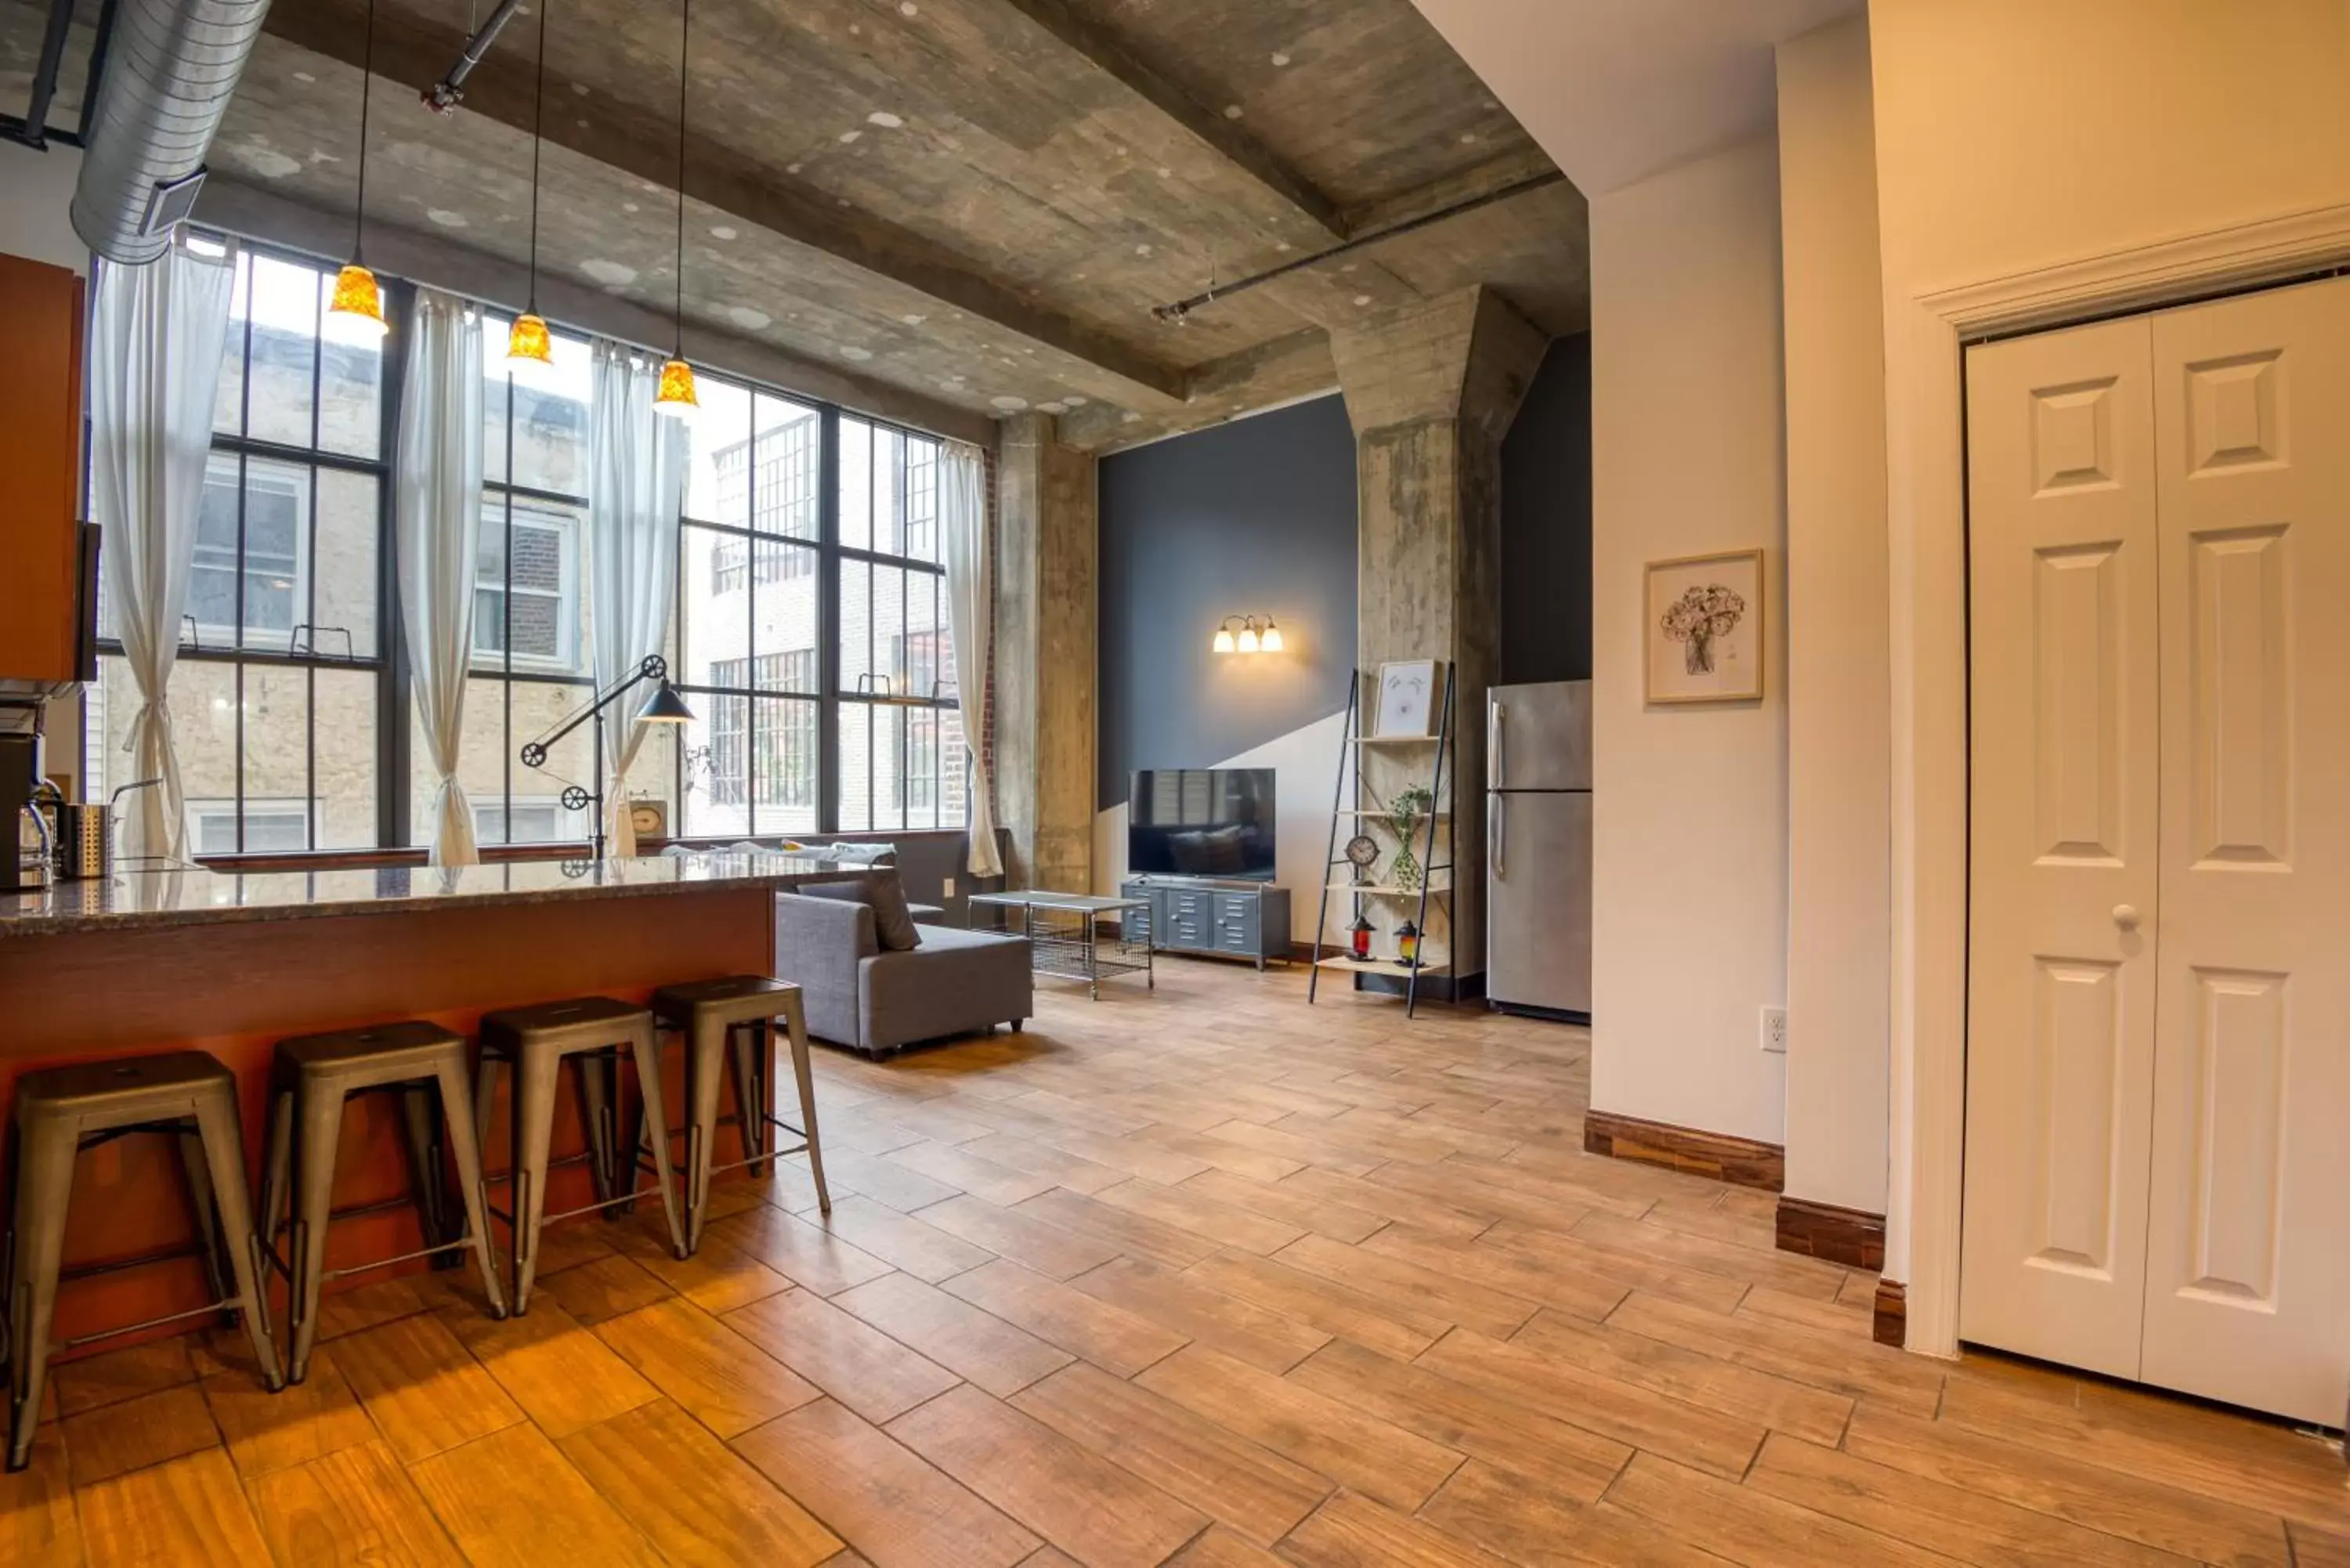 One-Bedroom Apartment in Sosuite at Independence Lofts - Callowhill